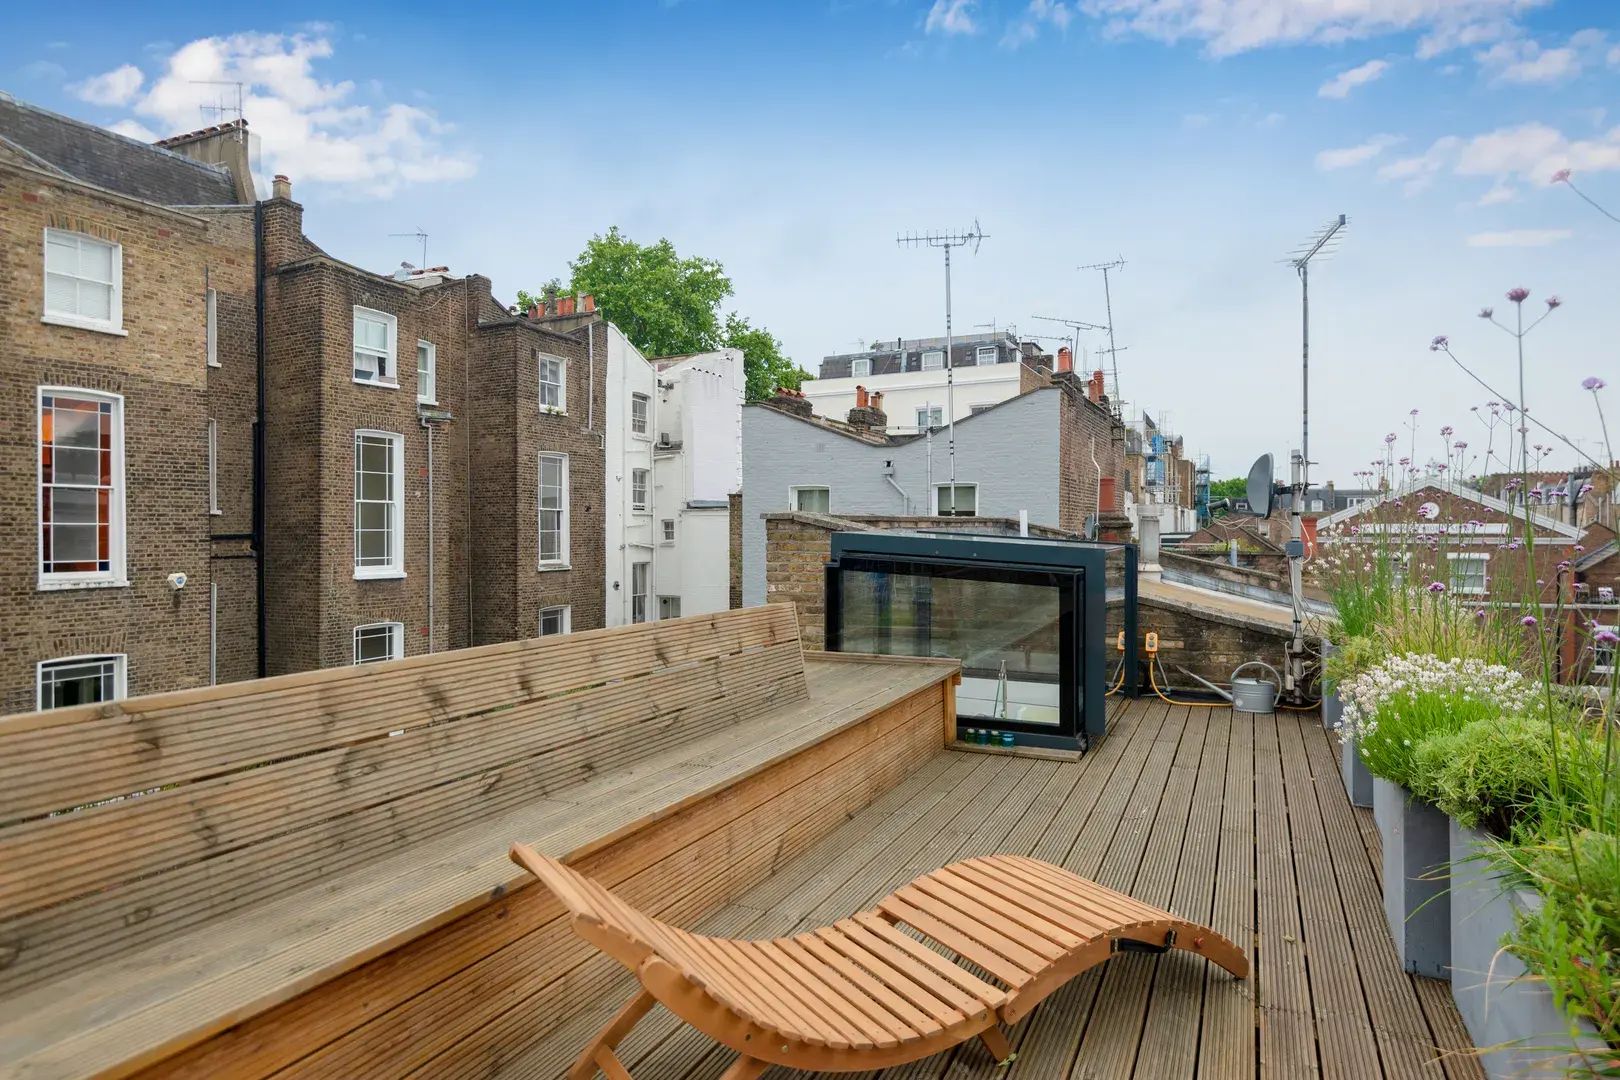 Saint Stephen's Mews, holiday home in Notting Hill, London